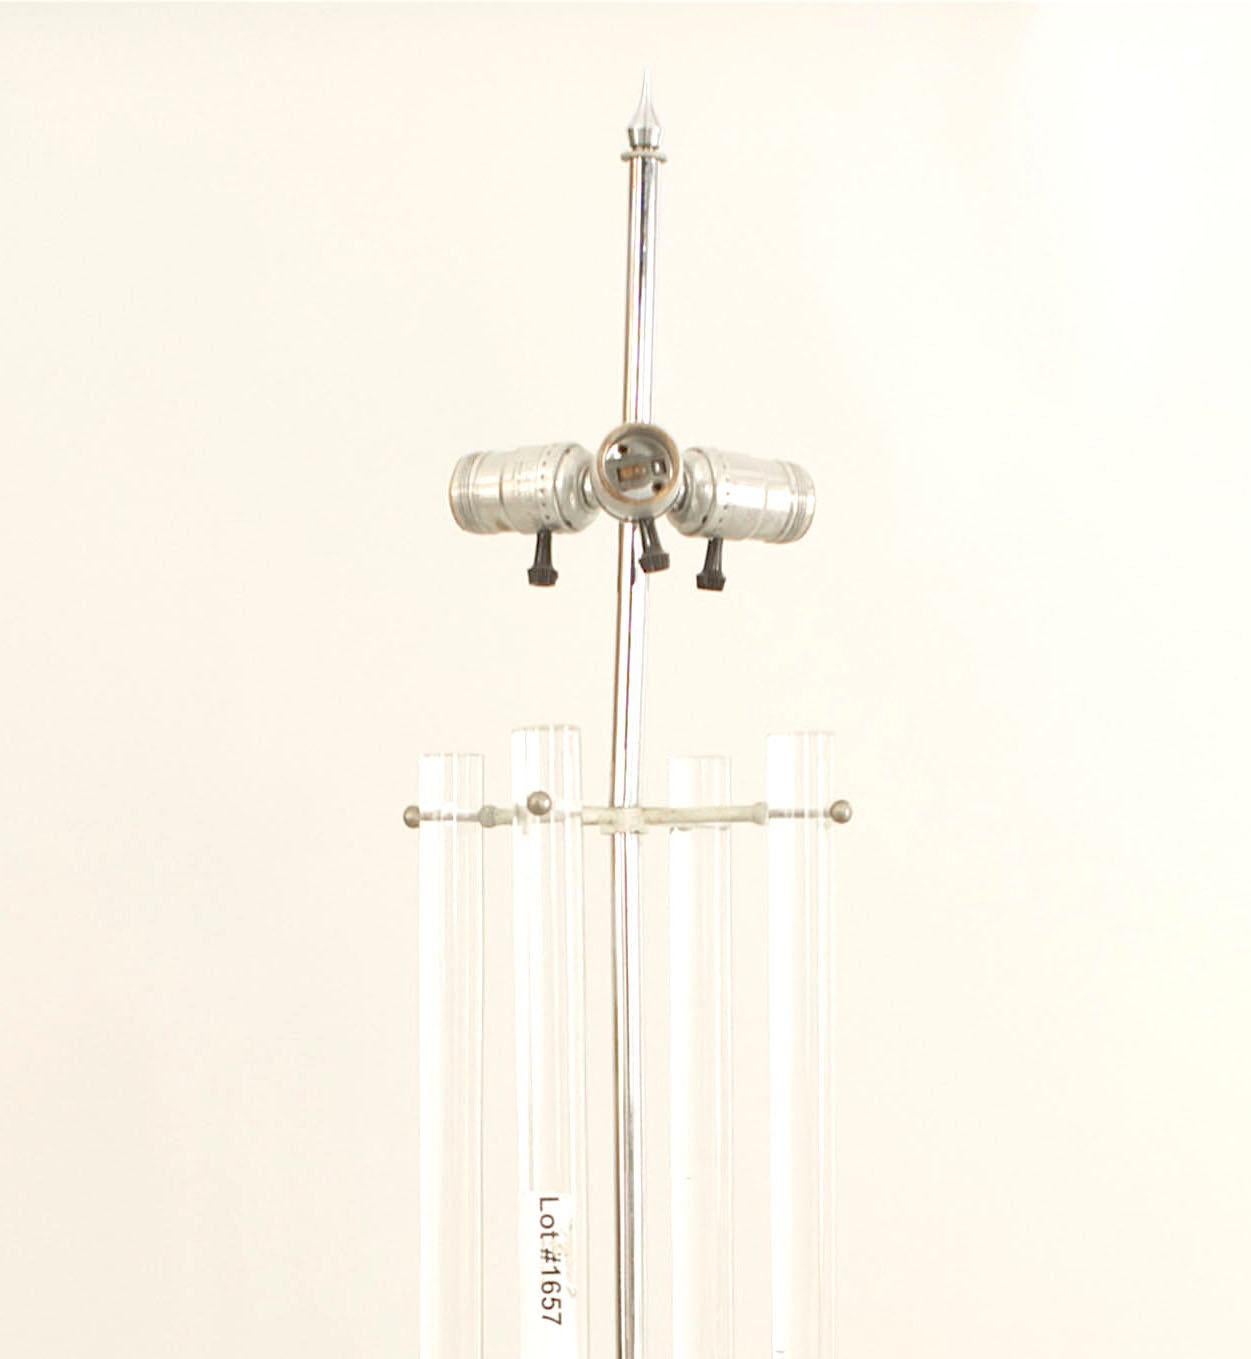 American midcentury table lamp with 4 tubular Lucite arms supported on a chrome stand and Centerport resting on a black cube base (att: PARZINGER)

Tommi Parzinger, born in 1903, was a German furniture designer and painter. He had begun by